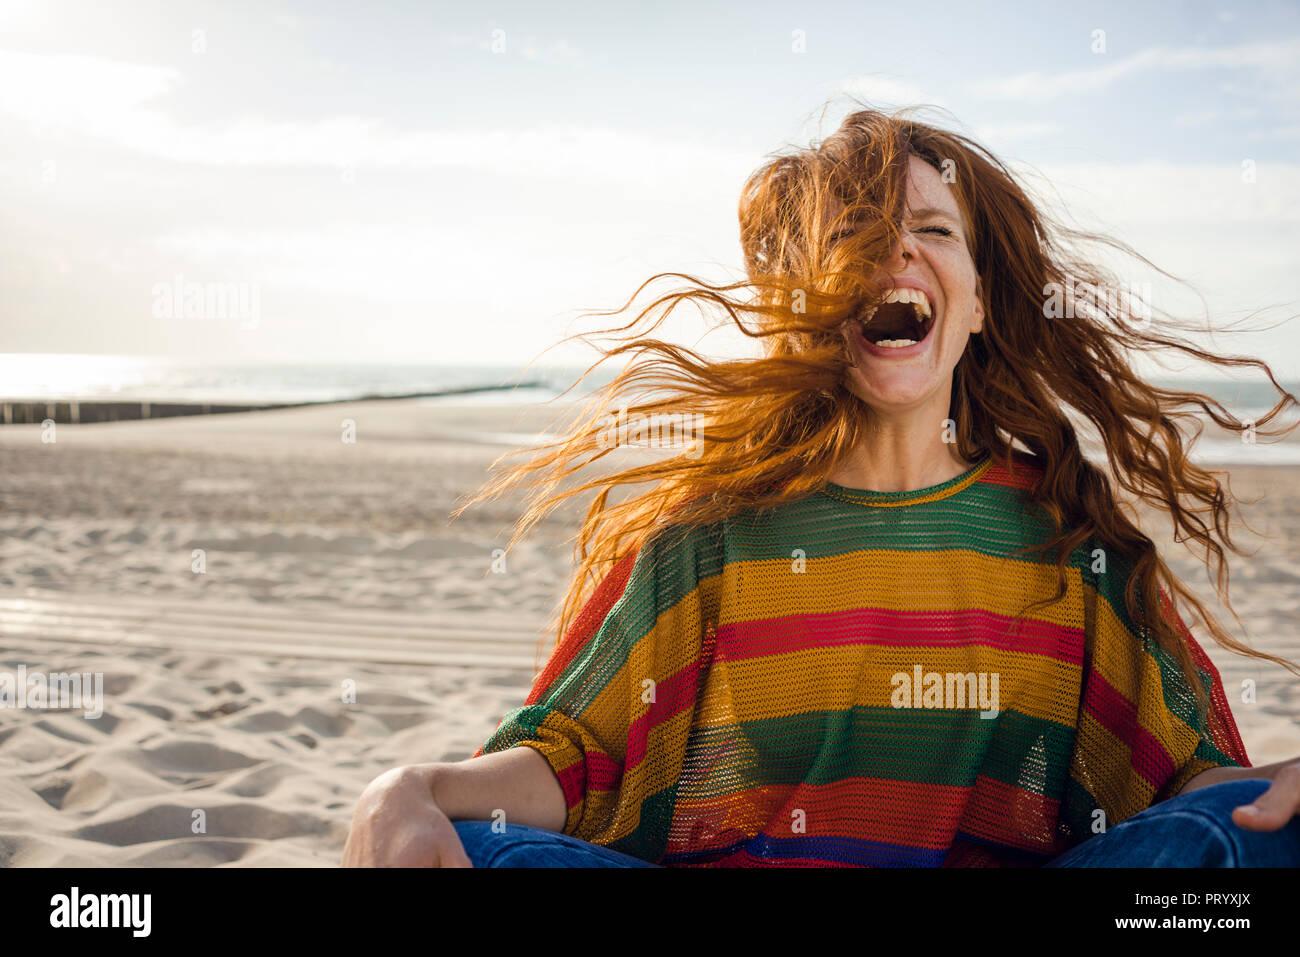 Woman sitting on the beach, screaming for joy Stock Photo